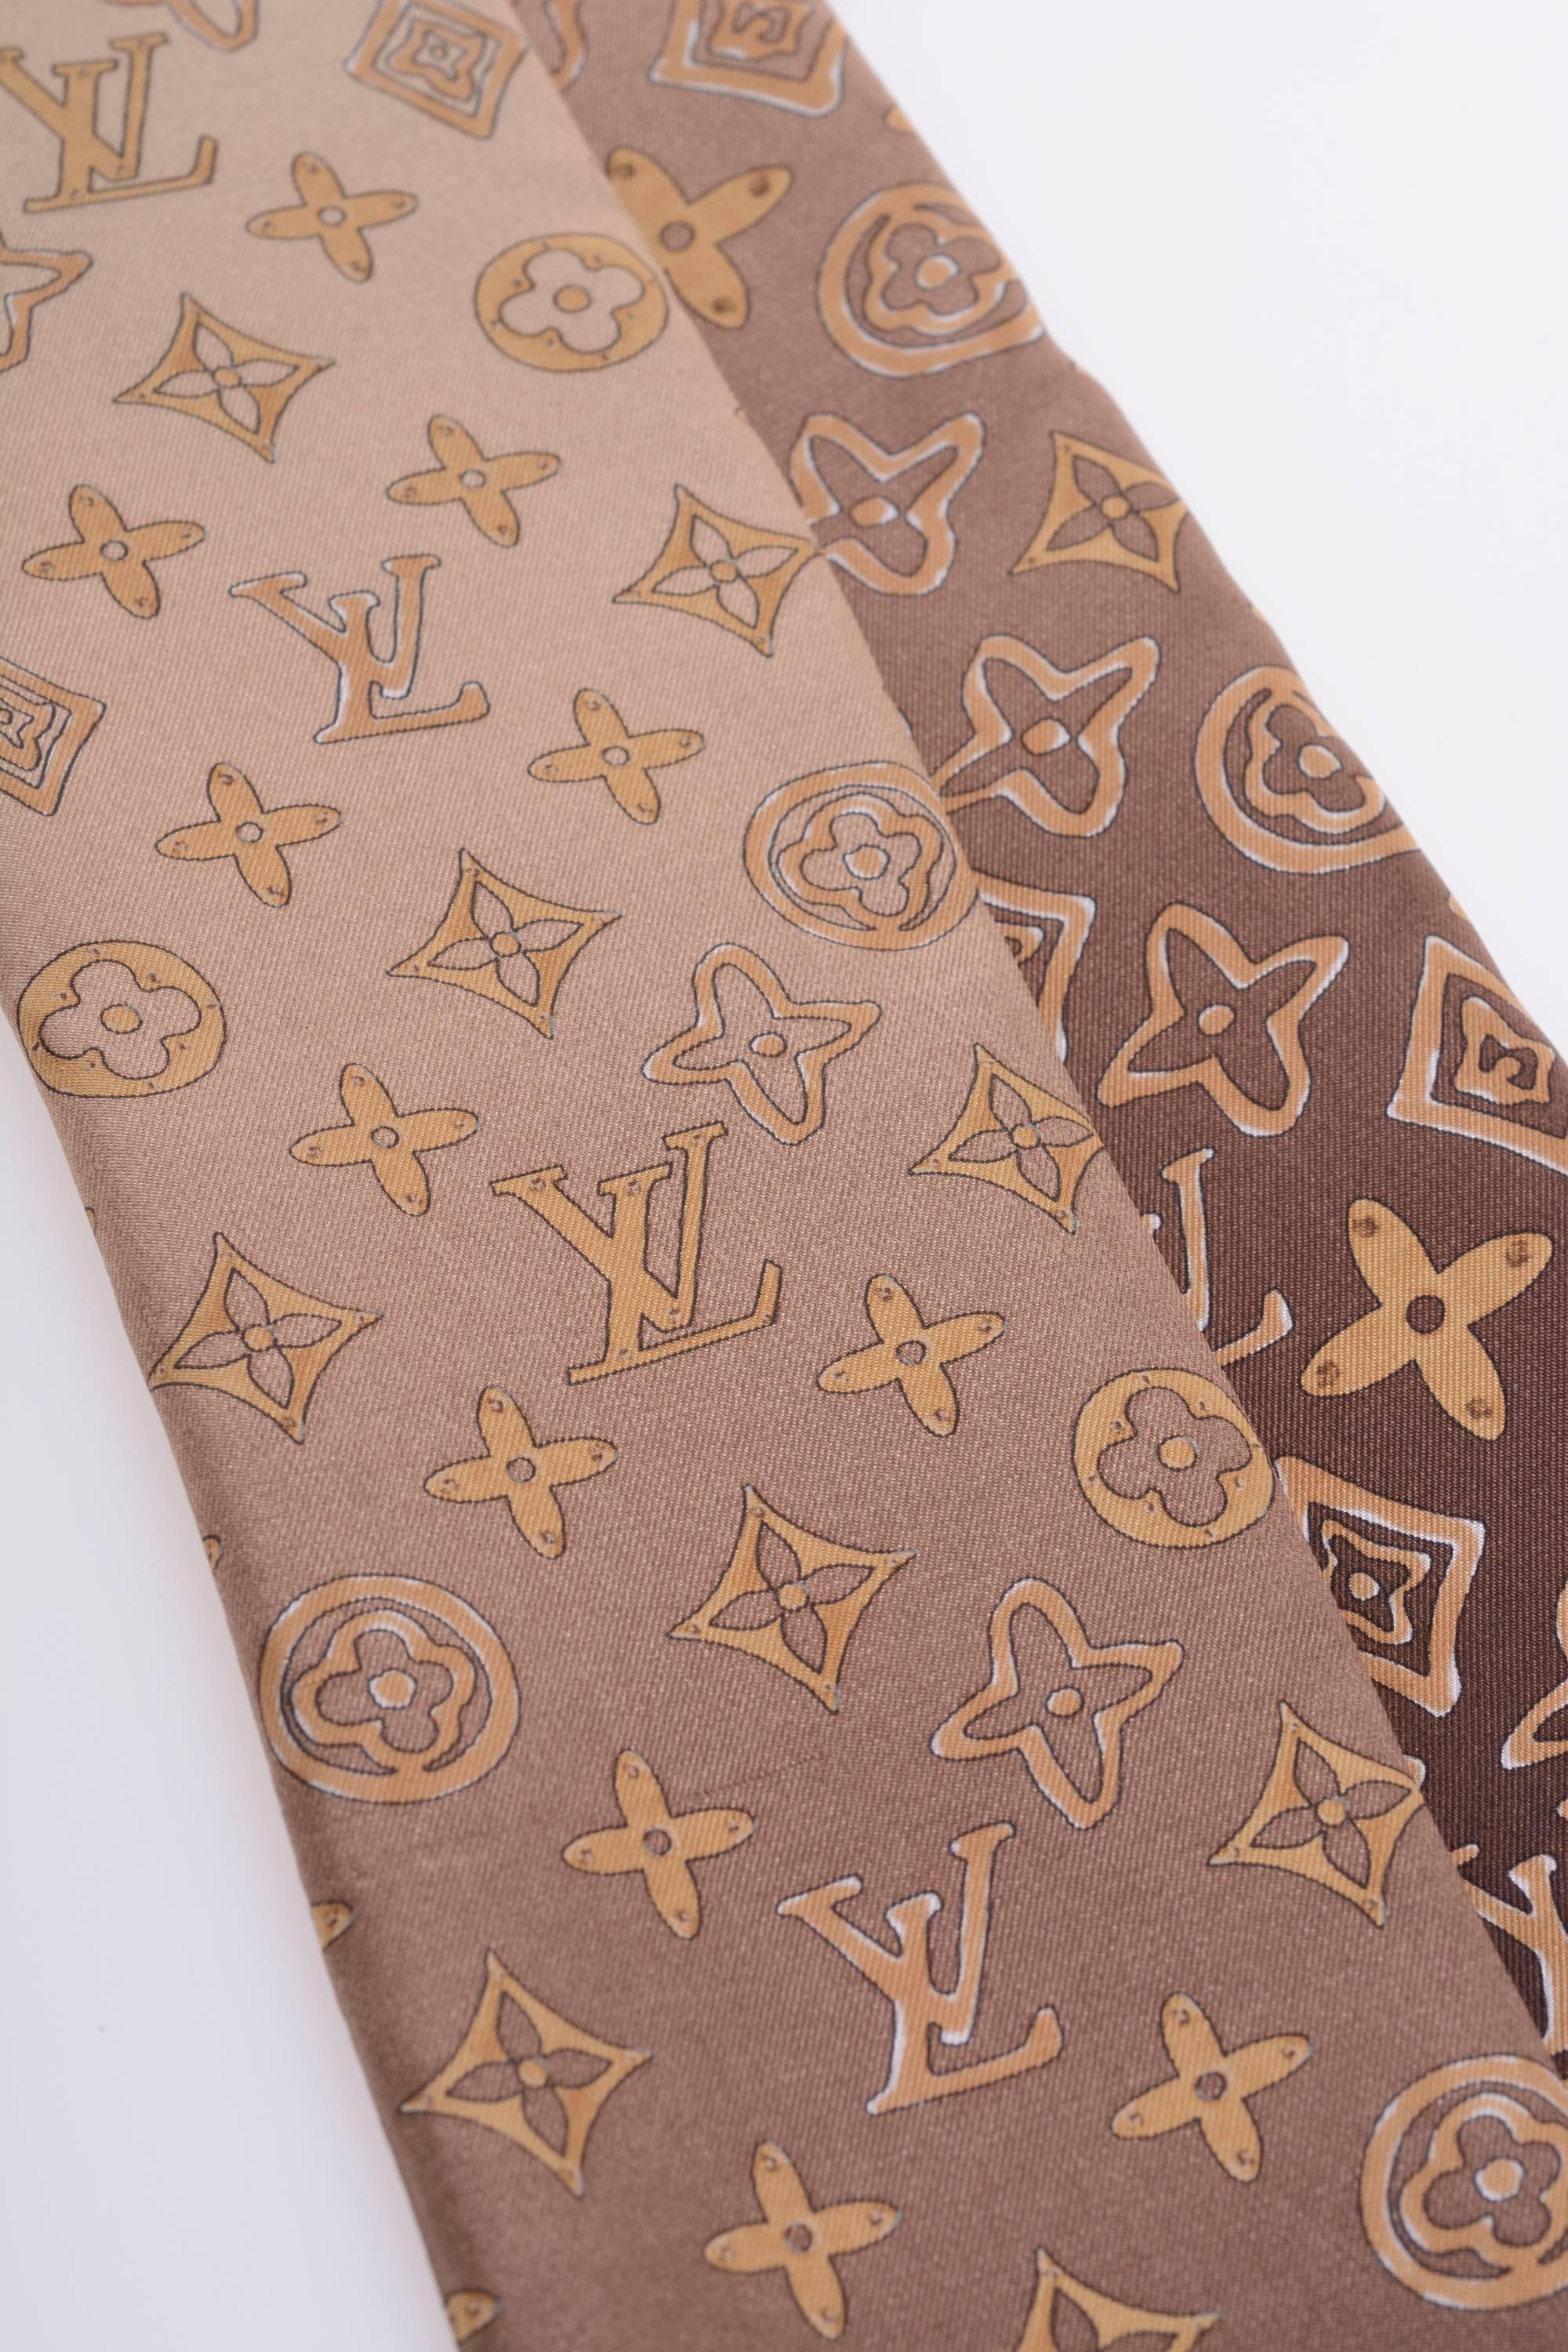 This authentic Louis Vuitton Sash Scarf is 100% silk and has typical background with LV monogram motif. 
Made in Italy

New condition with Tag

MEASUREMENTS:
3 x 47 inches